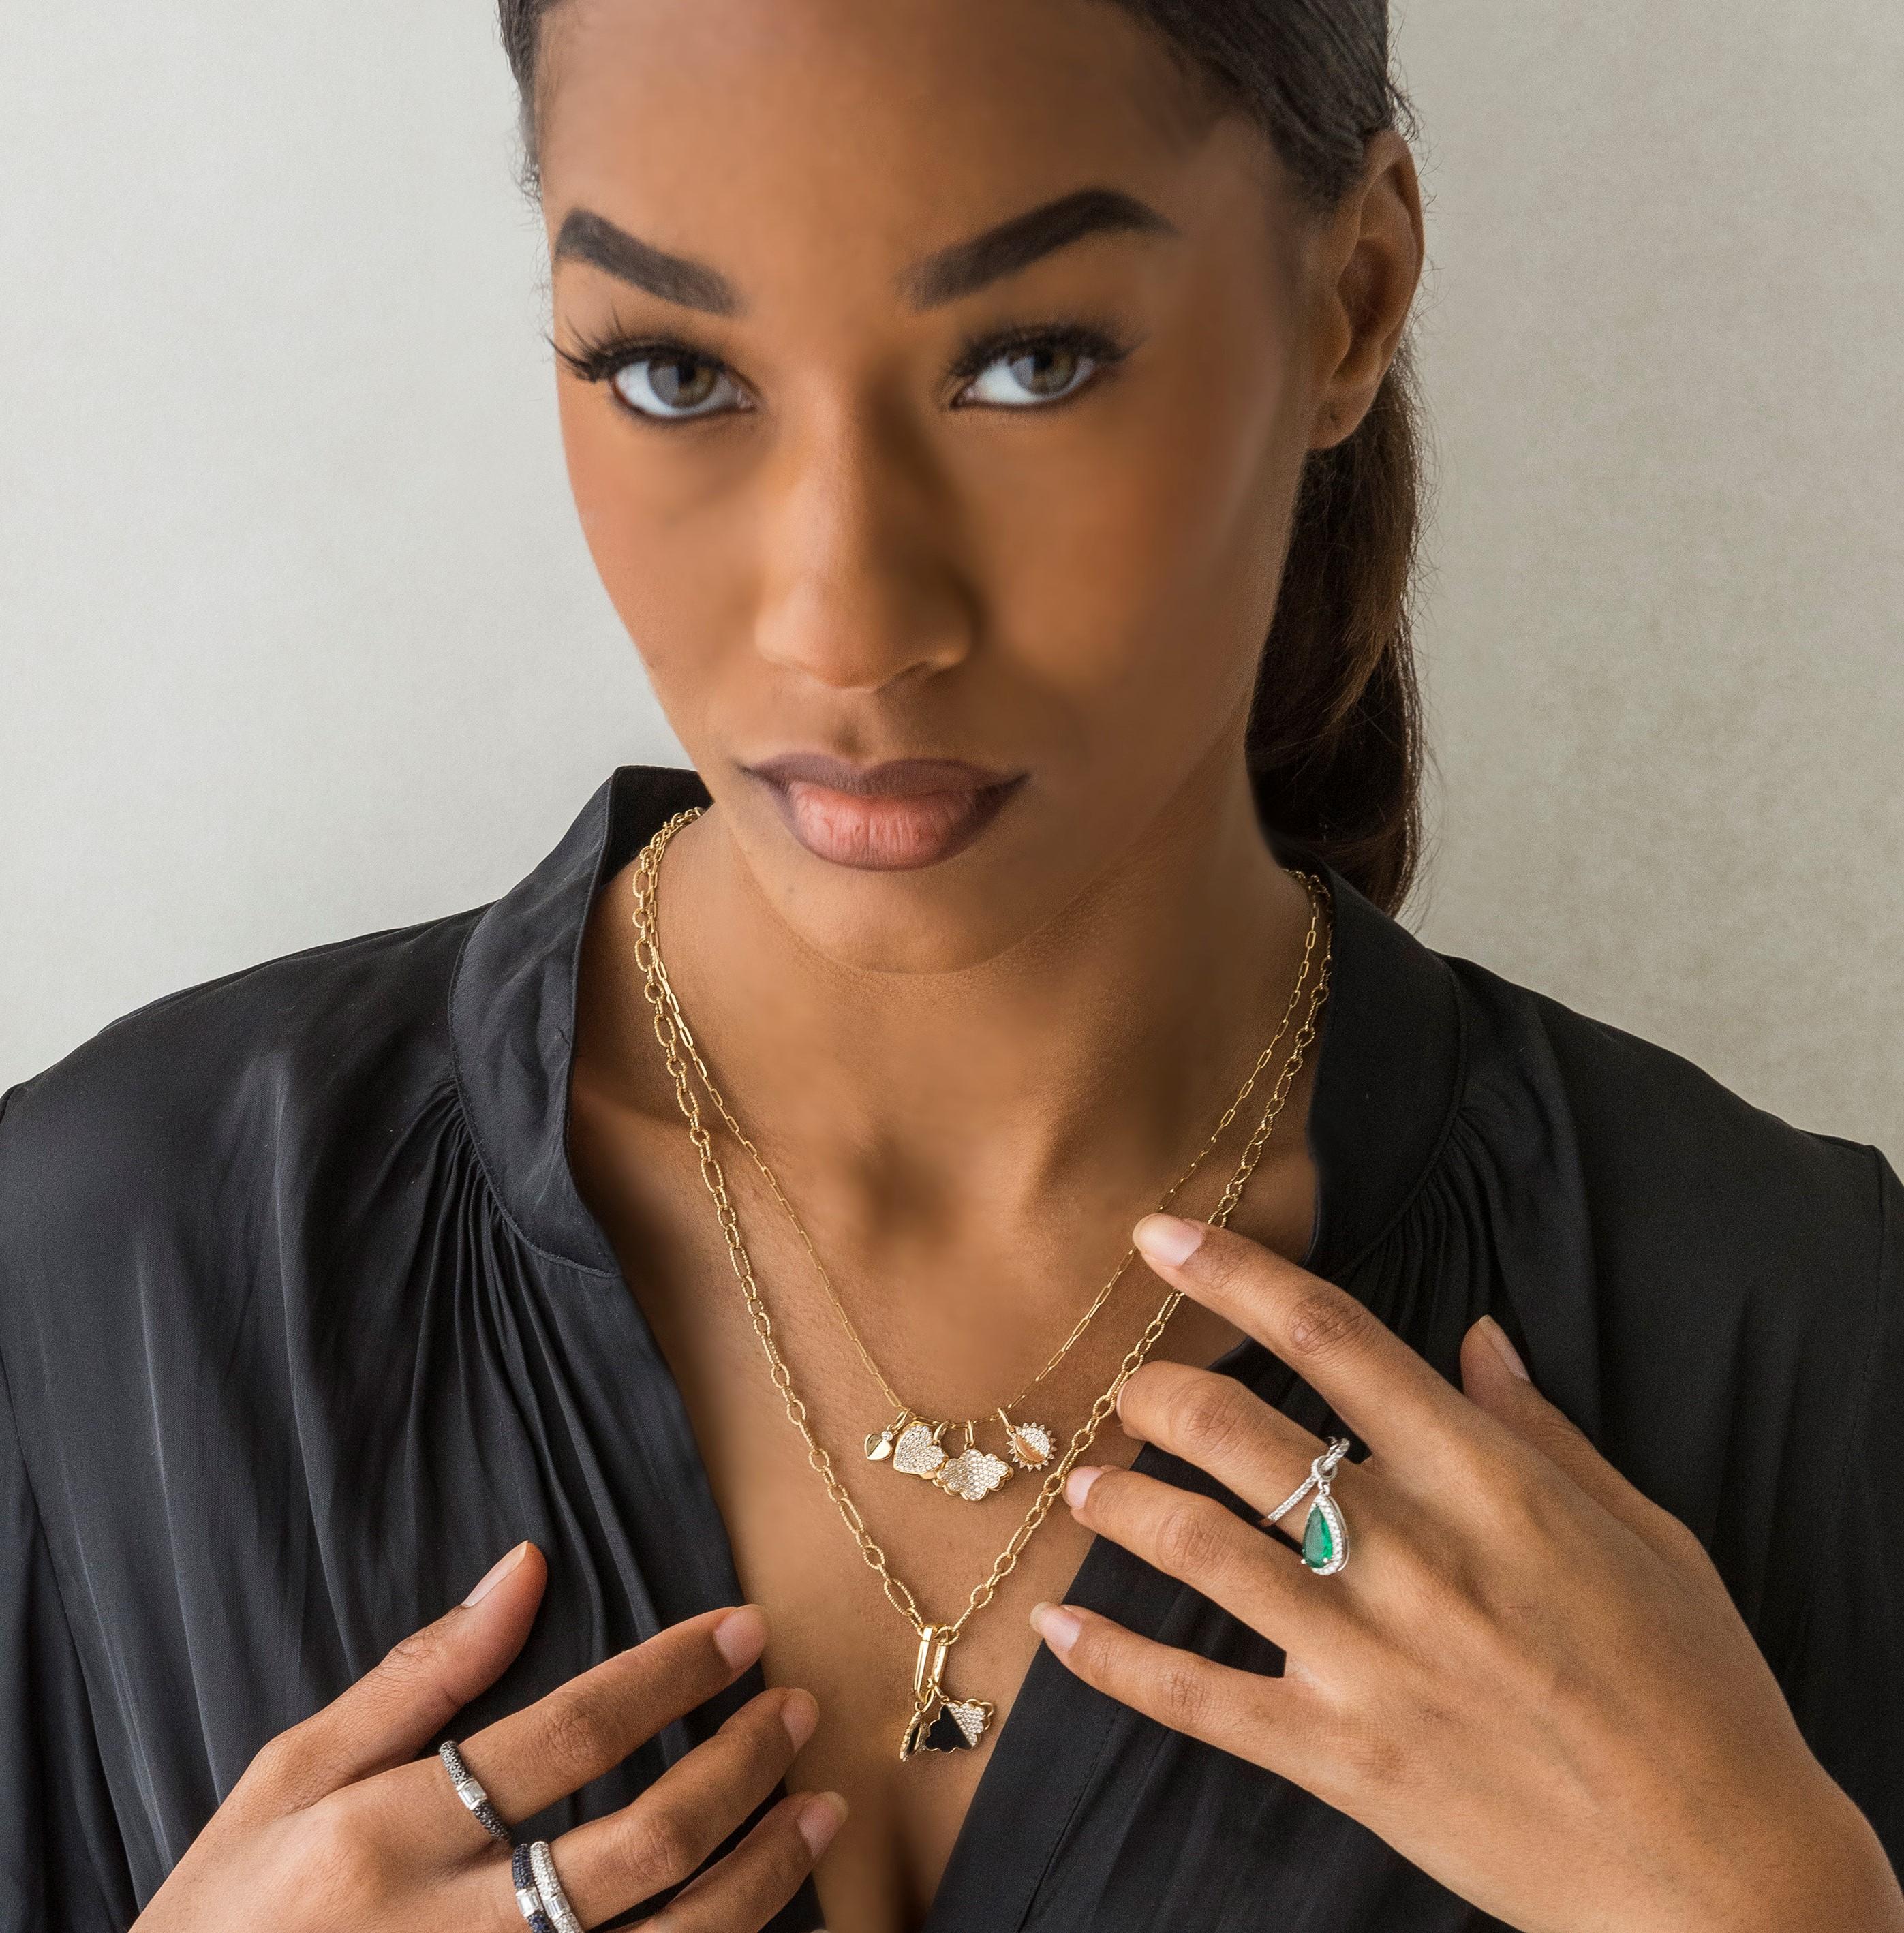 A collection symbolizing a special life moment or a new chapter in our life, the Memento collection is a luxurious and modern representation of classical motifs. This collection features diamond encrusted pieces set in 14k gold, and includes